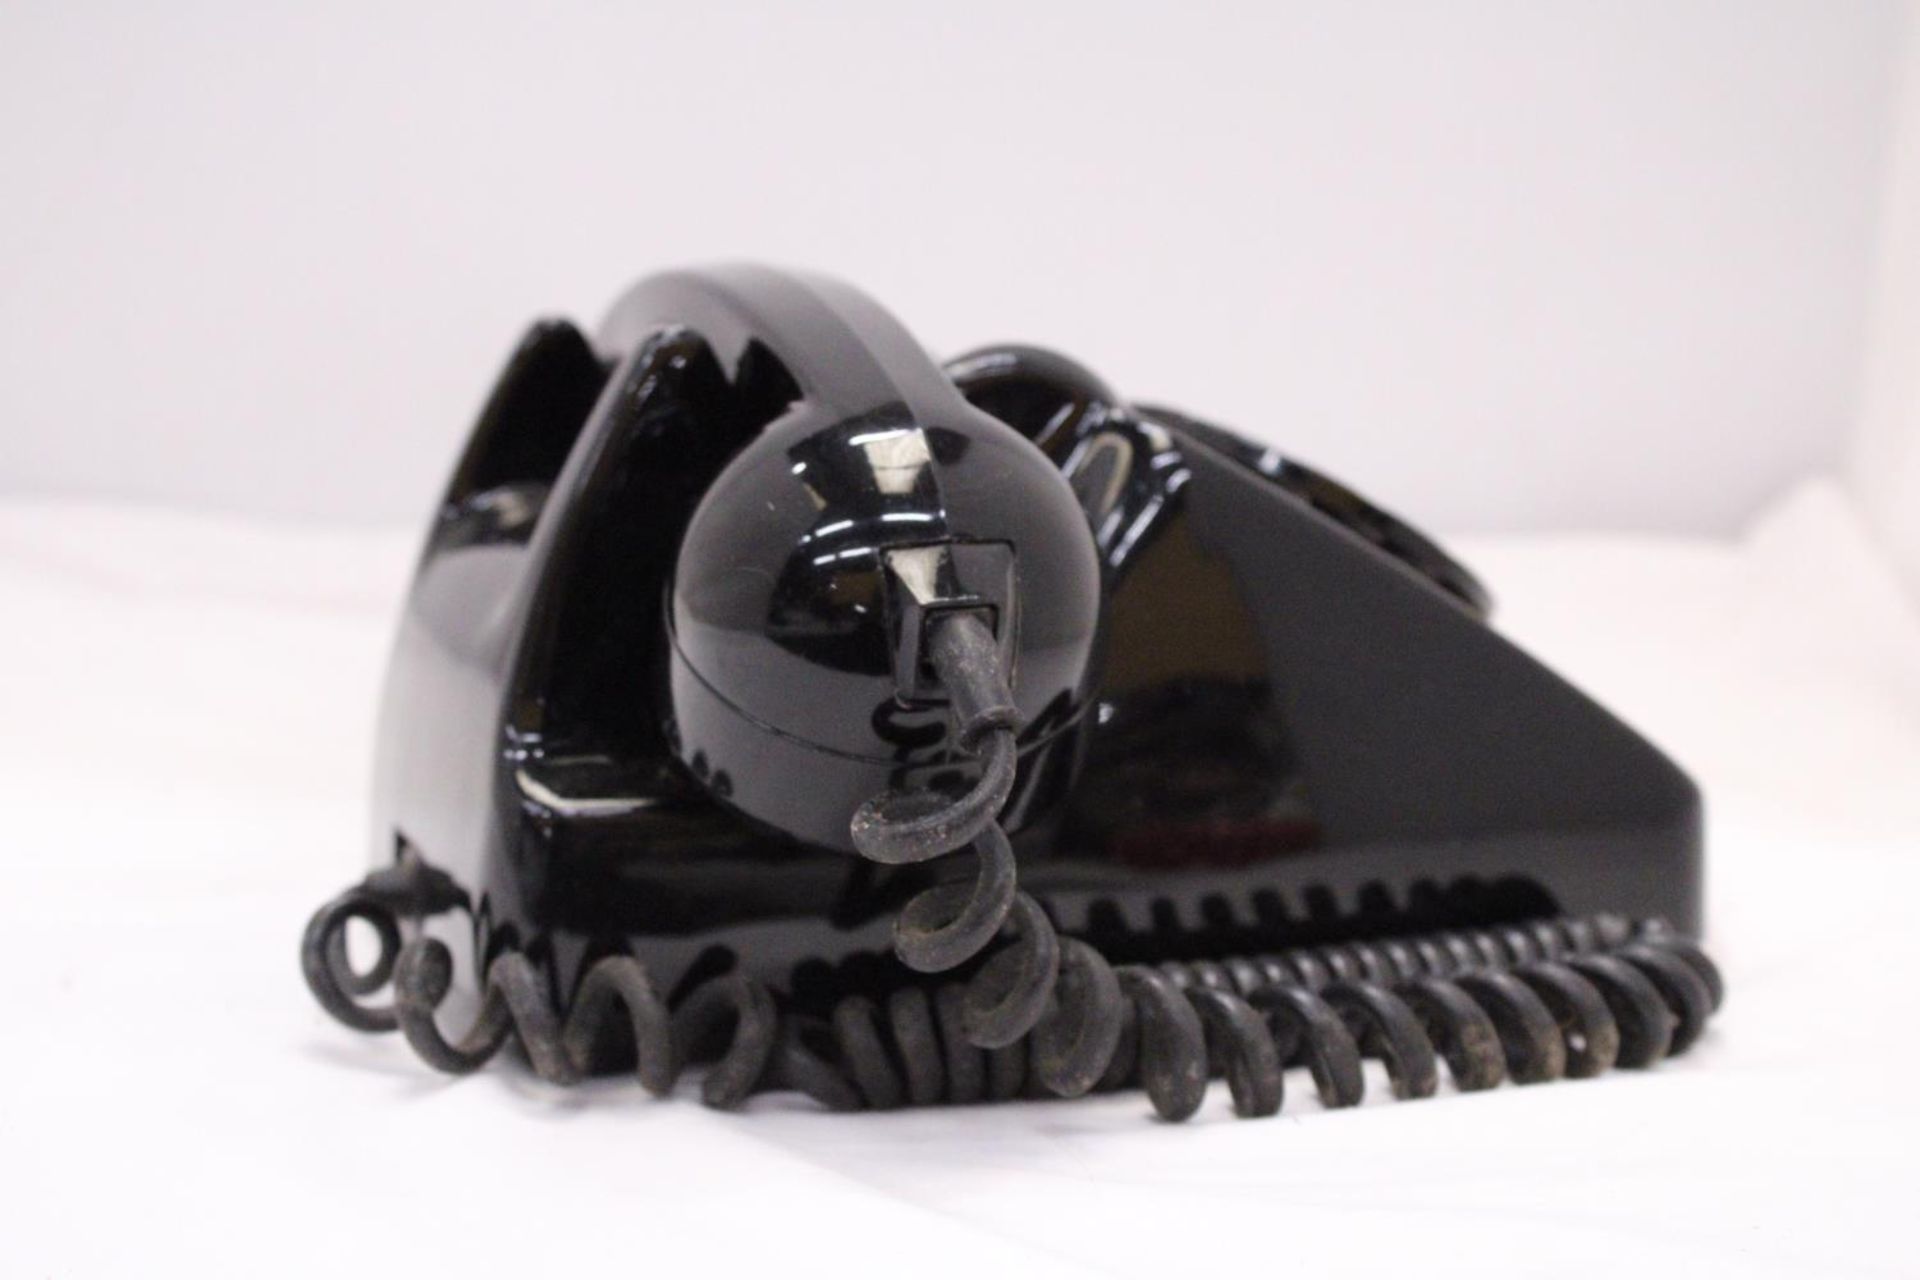 A VINTAGE BLACK TELEPHONE WITH DIAL - Image 6 of 6